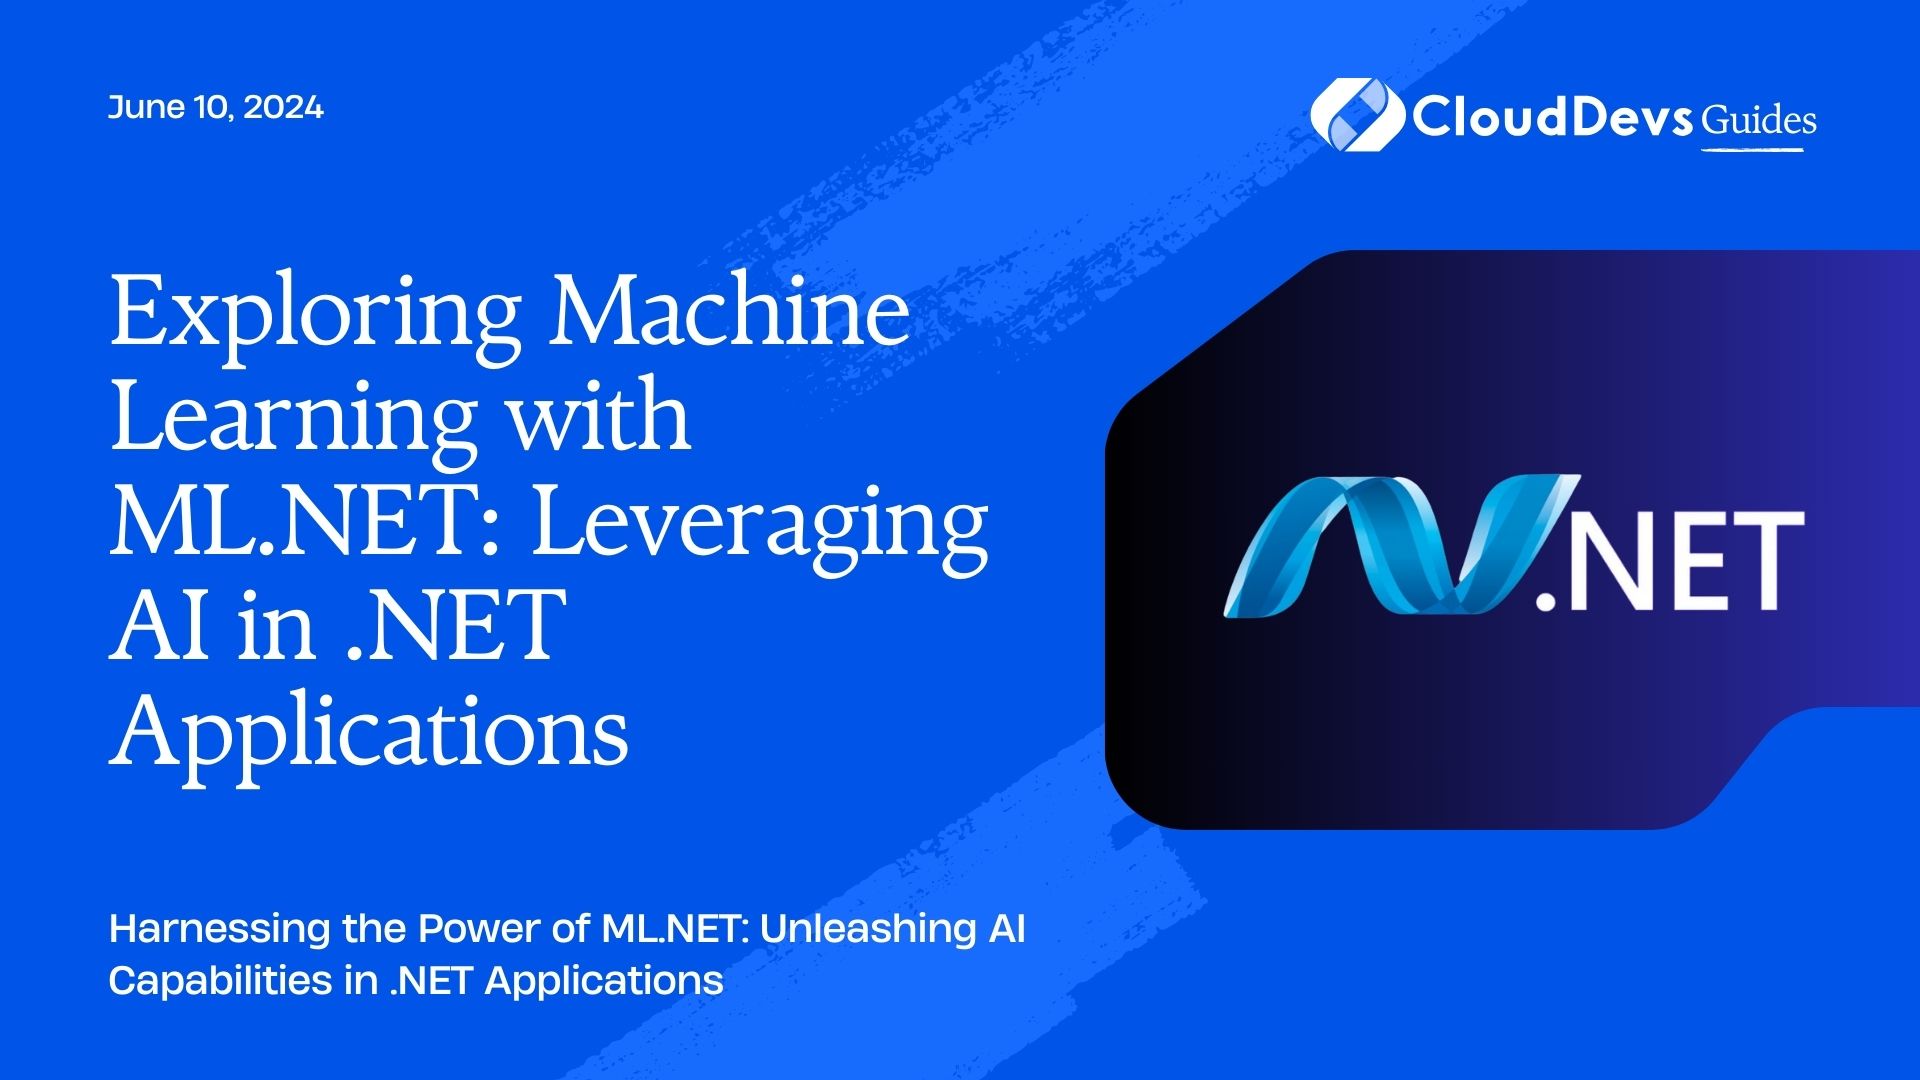 Exploring Machine Learning with ML.NET: Leveraging AI in .NET Applications